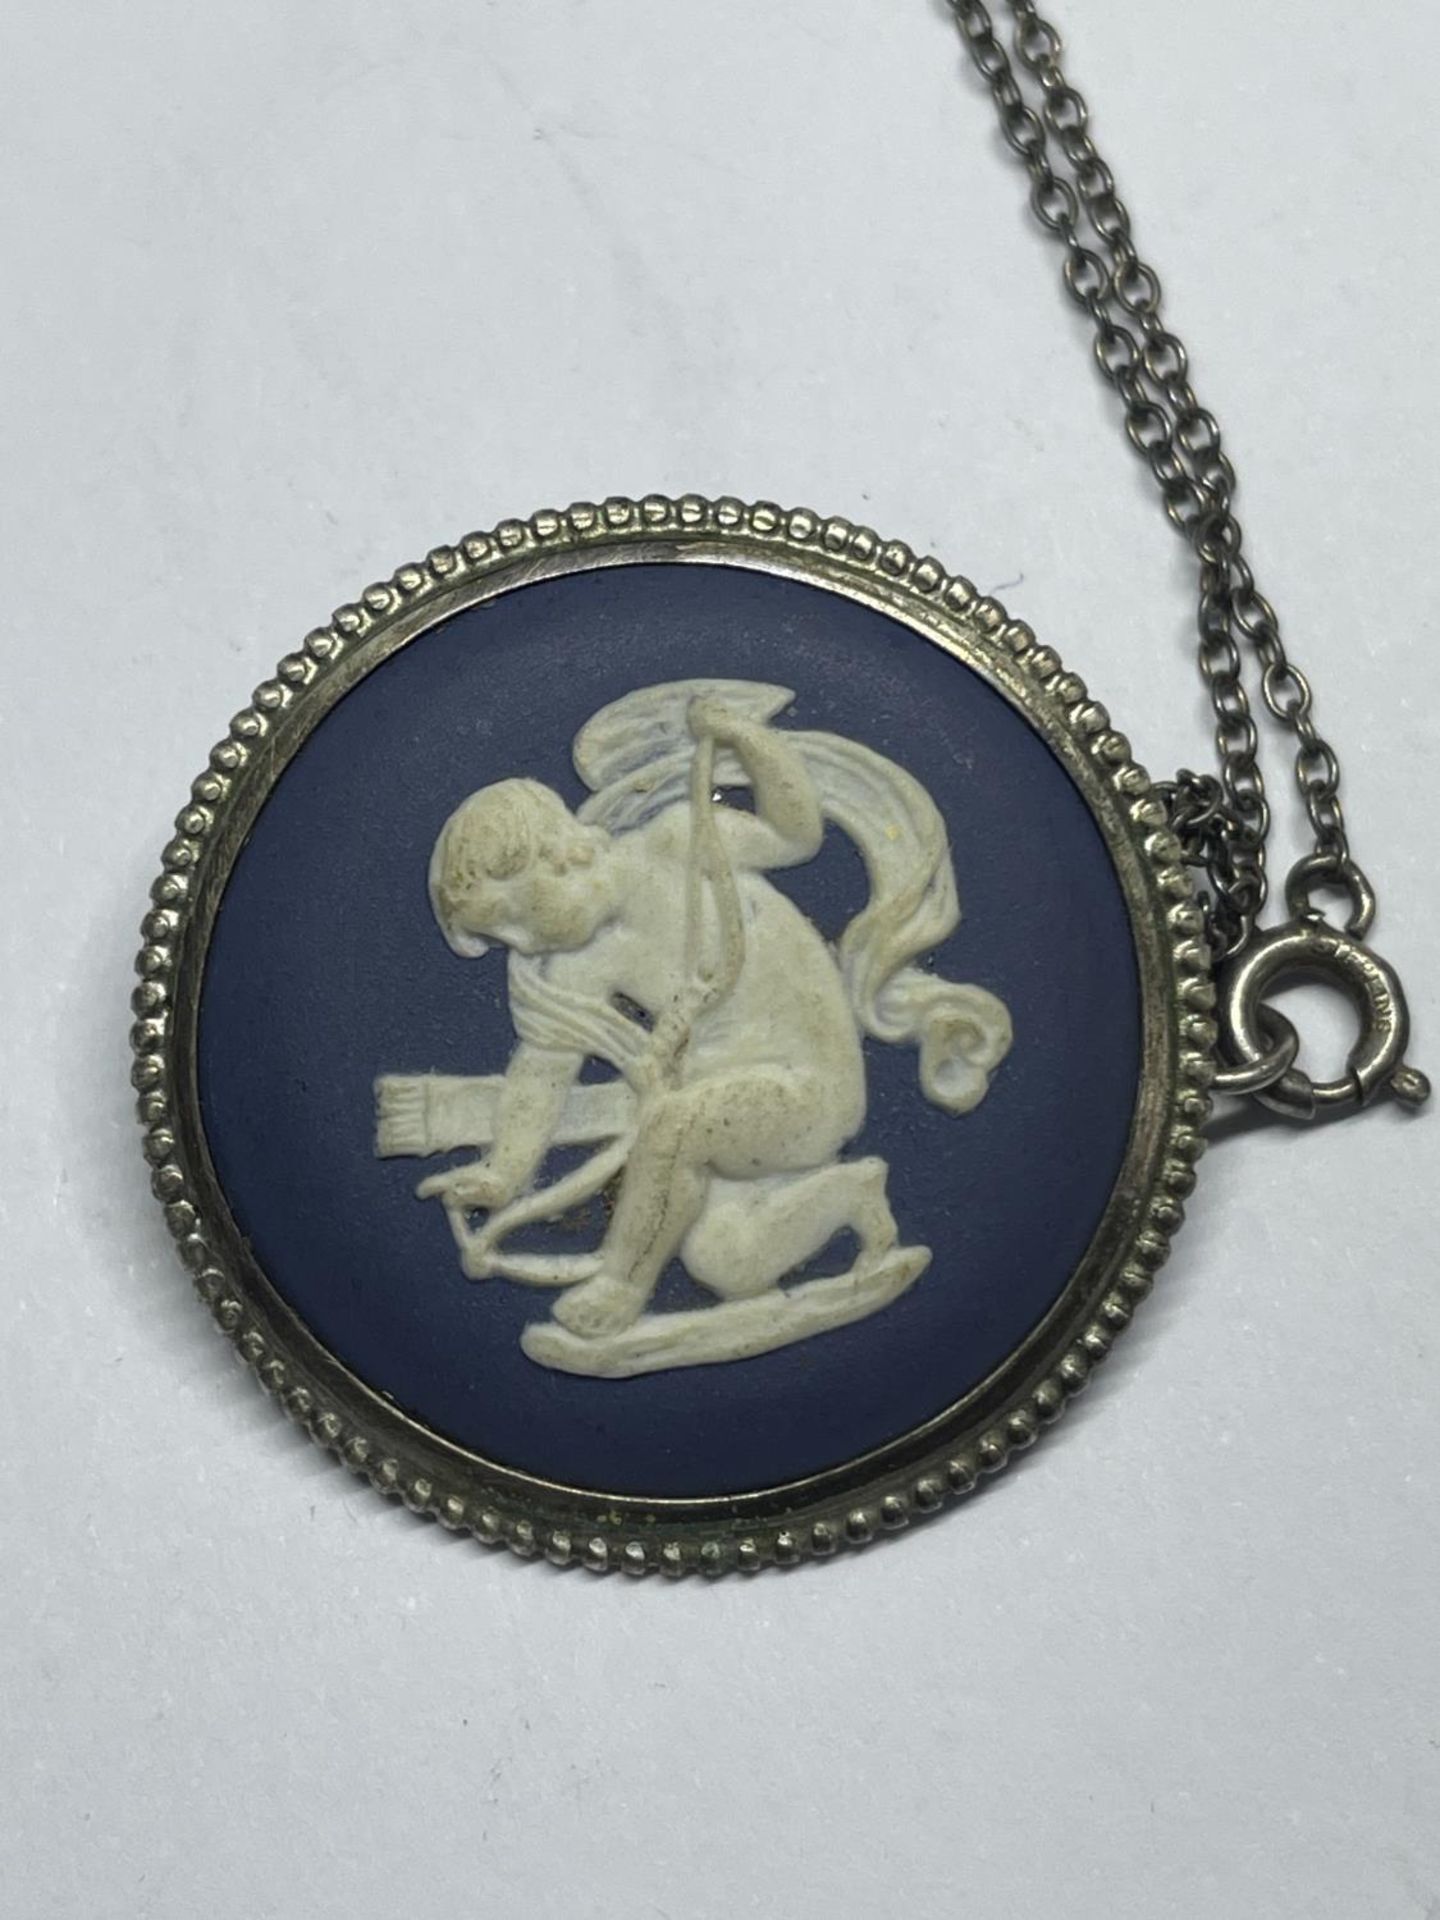 TWO WEDGWOOD JASPERWARE ITEMS TO INCLUDE A BLUE BROOCH AND A NECKLACE WITH GREEN PENDANT - Image 3 of 3